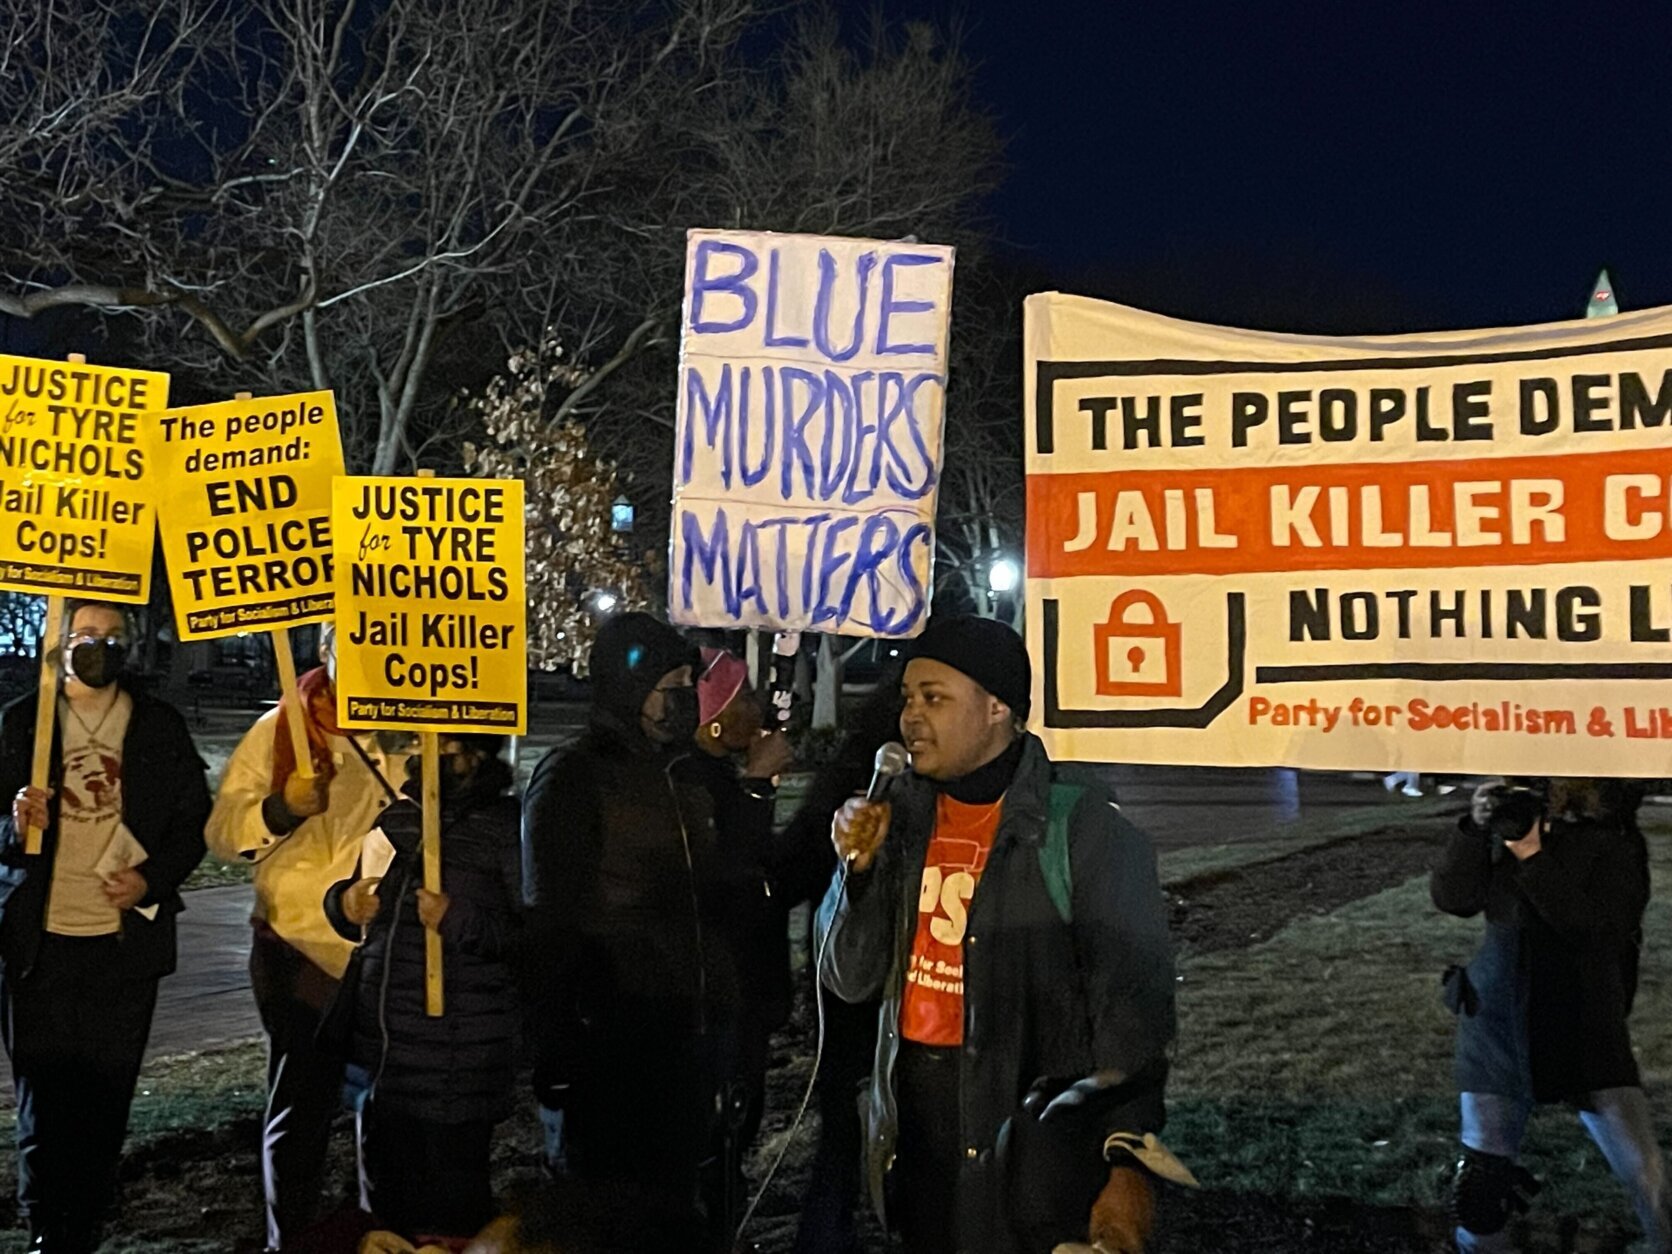 The Party for Socialism and Liberation protesters in downtown D.C. holding signs that read "The people demand: Jail Killer Cops; Nothing Less!"